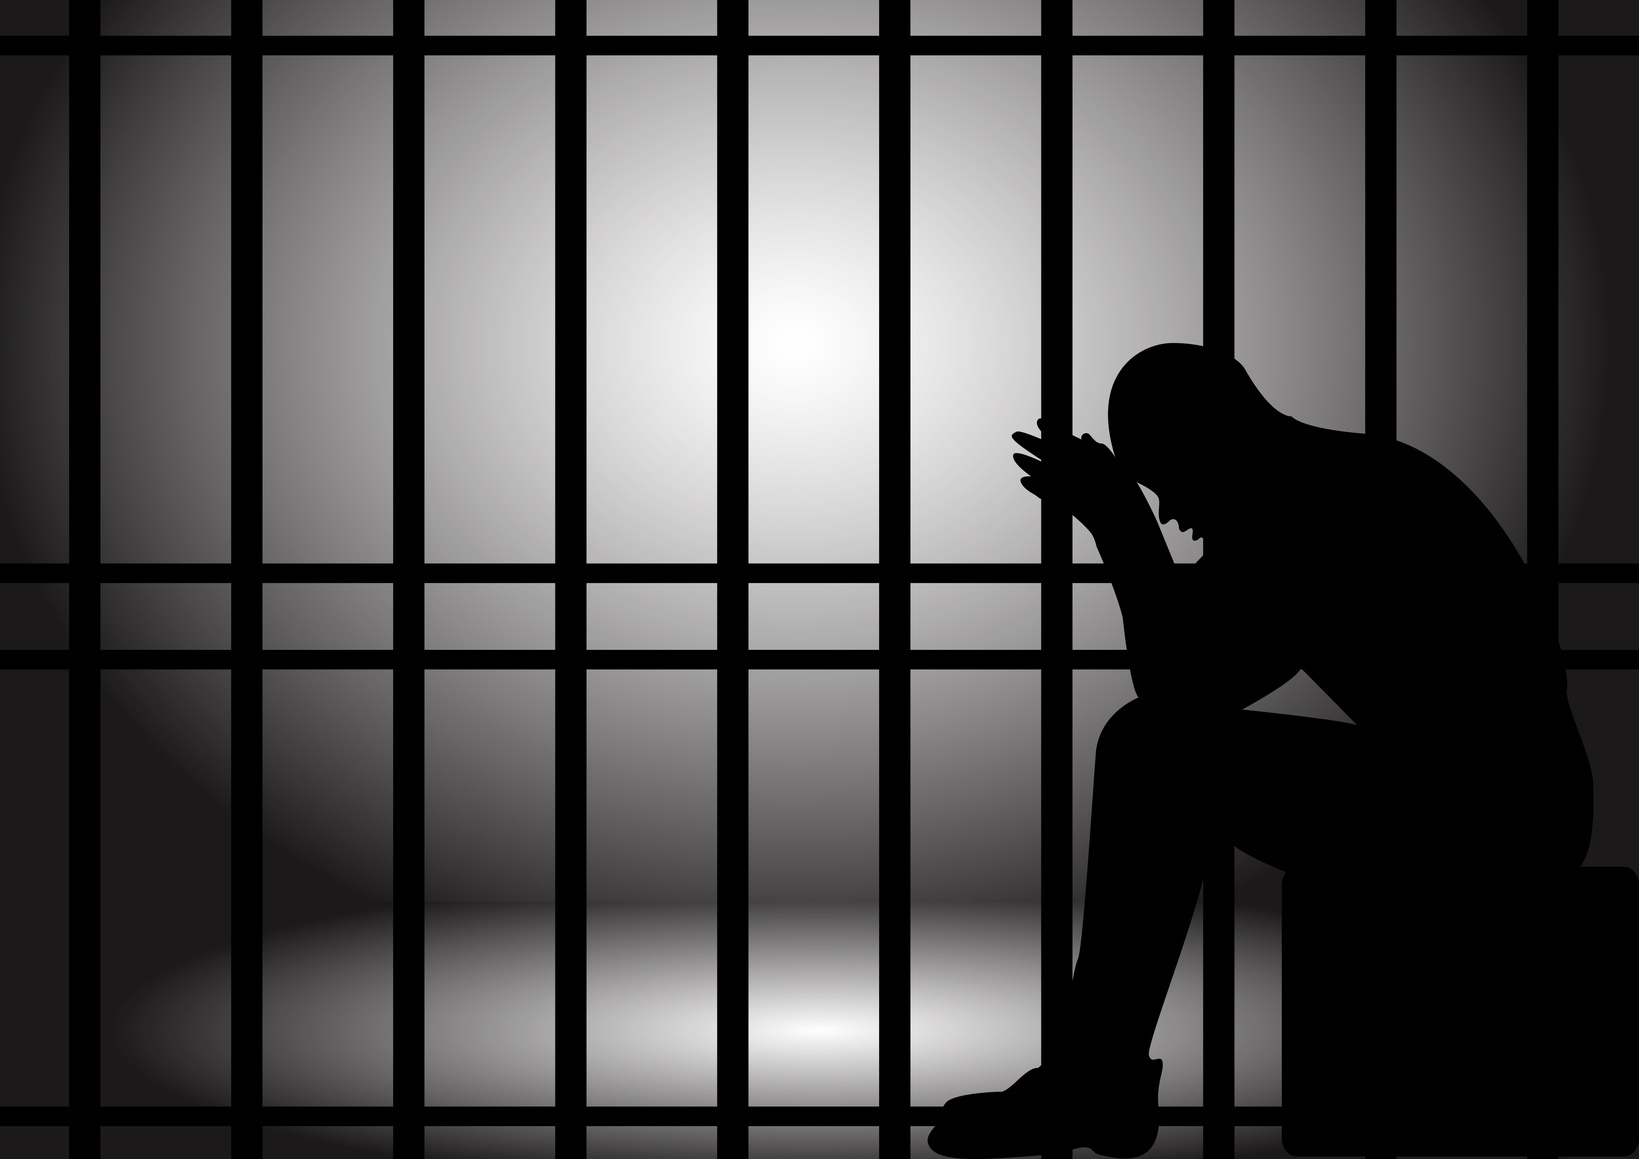 Graduate jailed 2 years for impersonation, internet romance scam